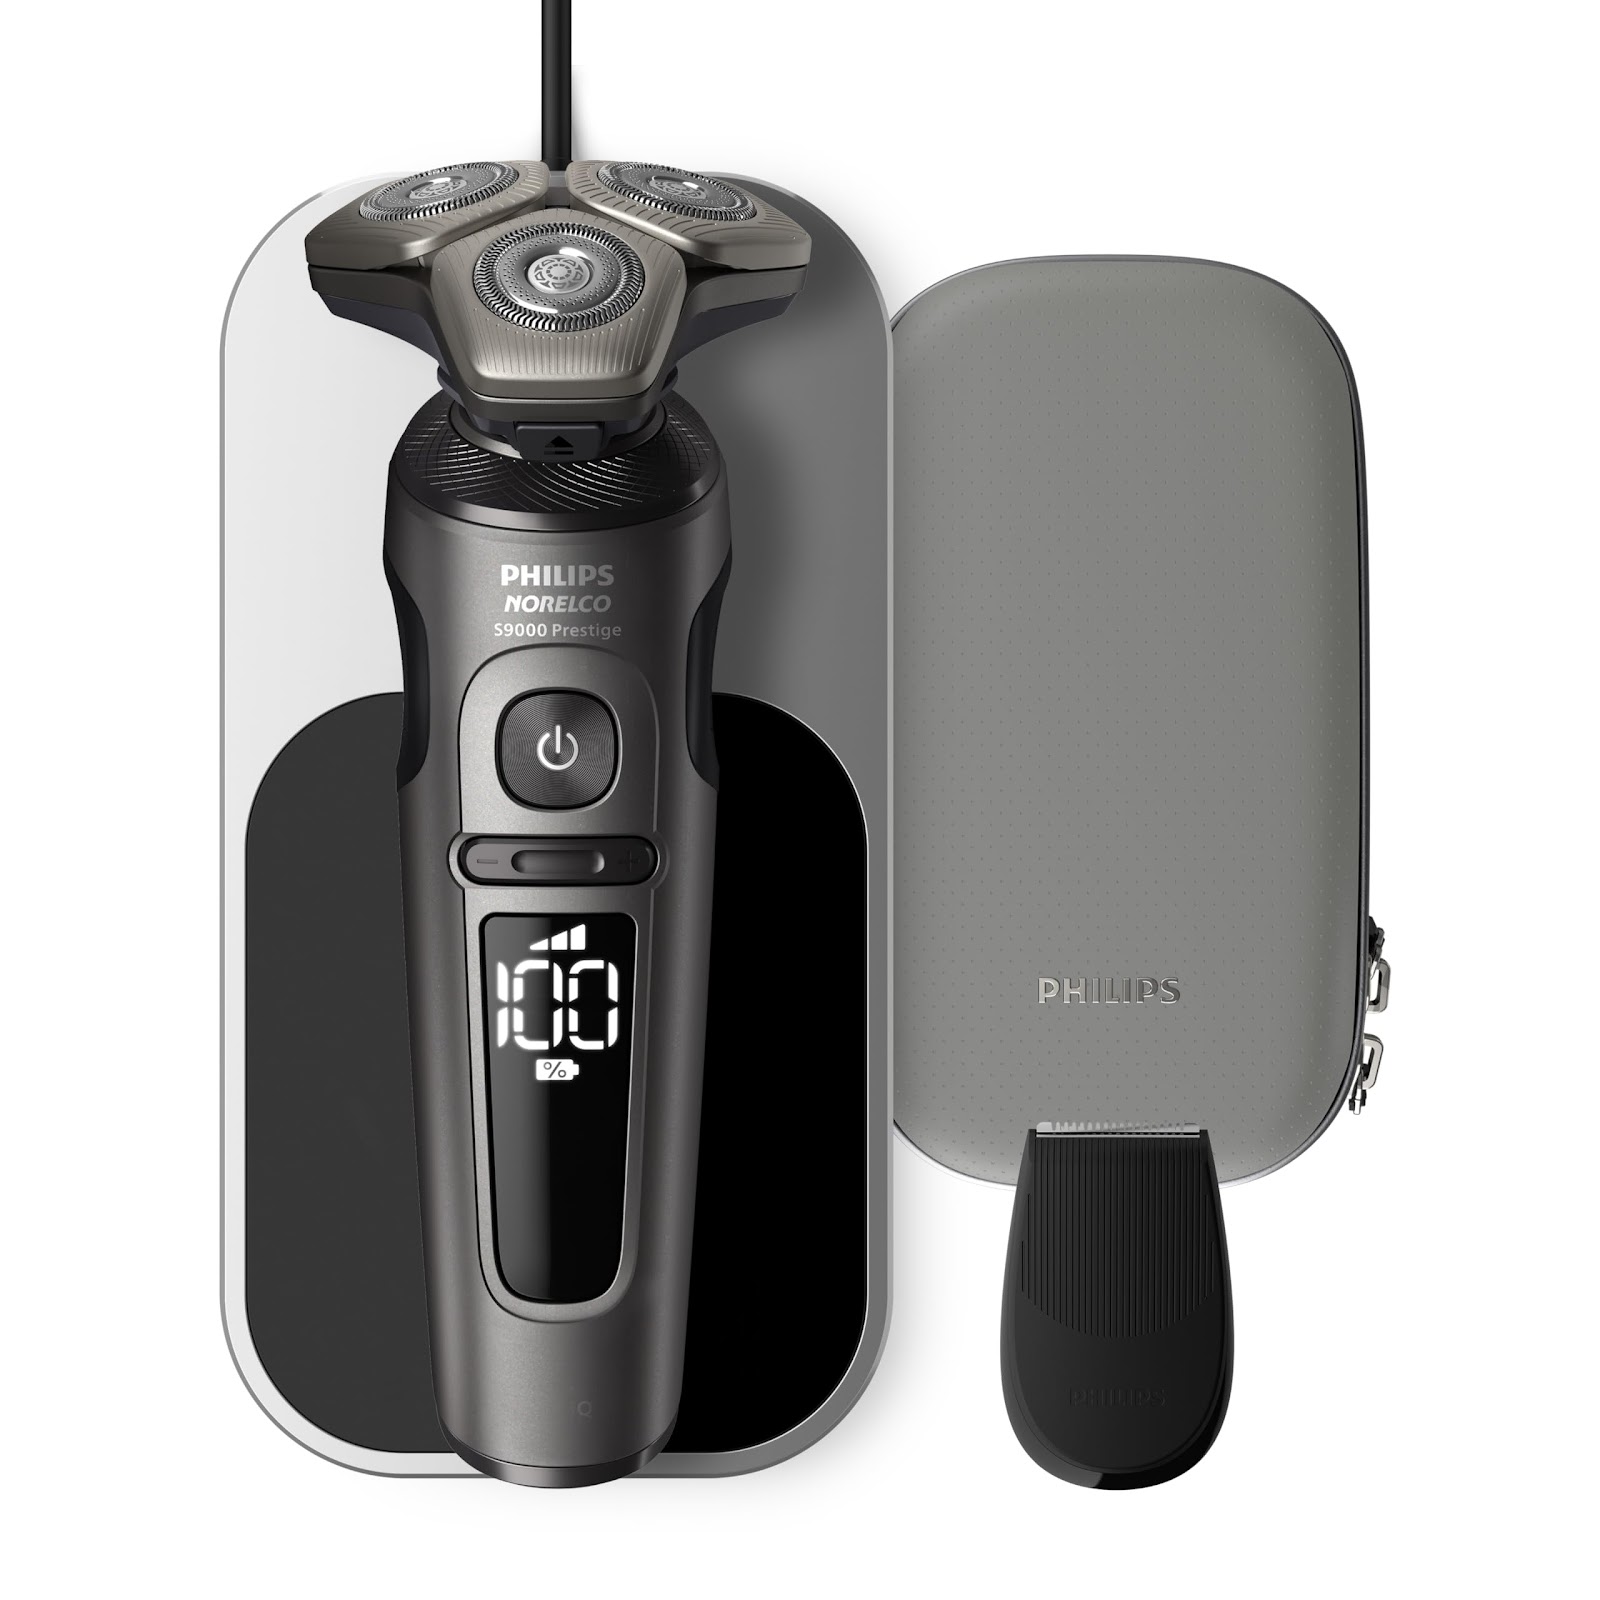 Philips Norelco S9000 Prestige Electric Shaver with Qi-Charger